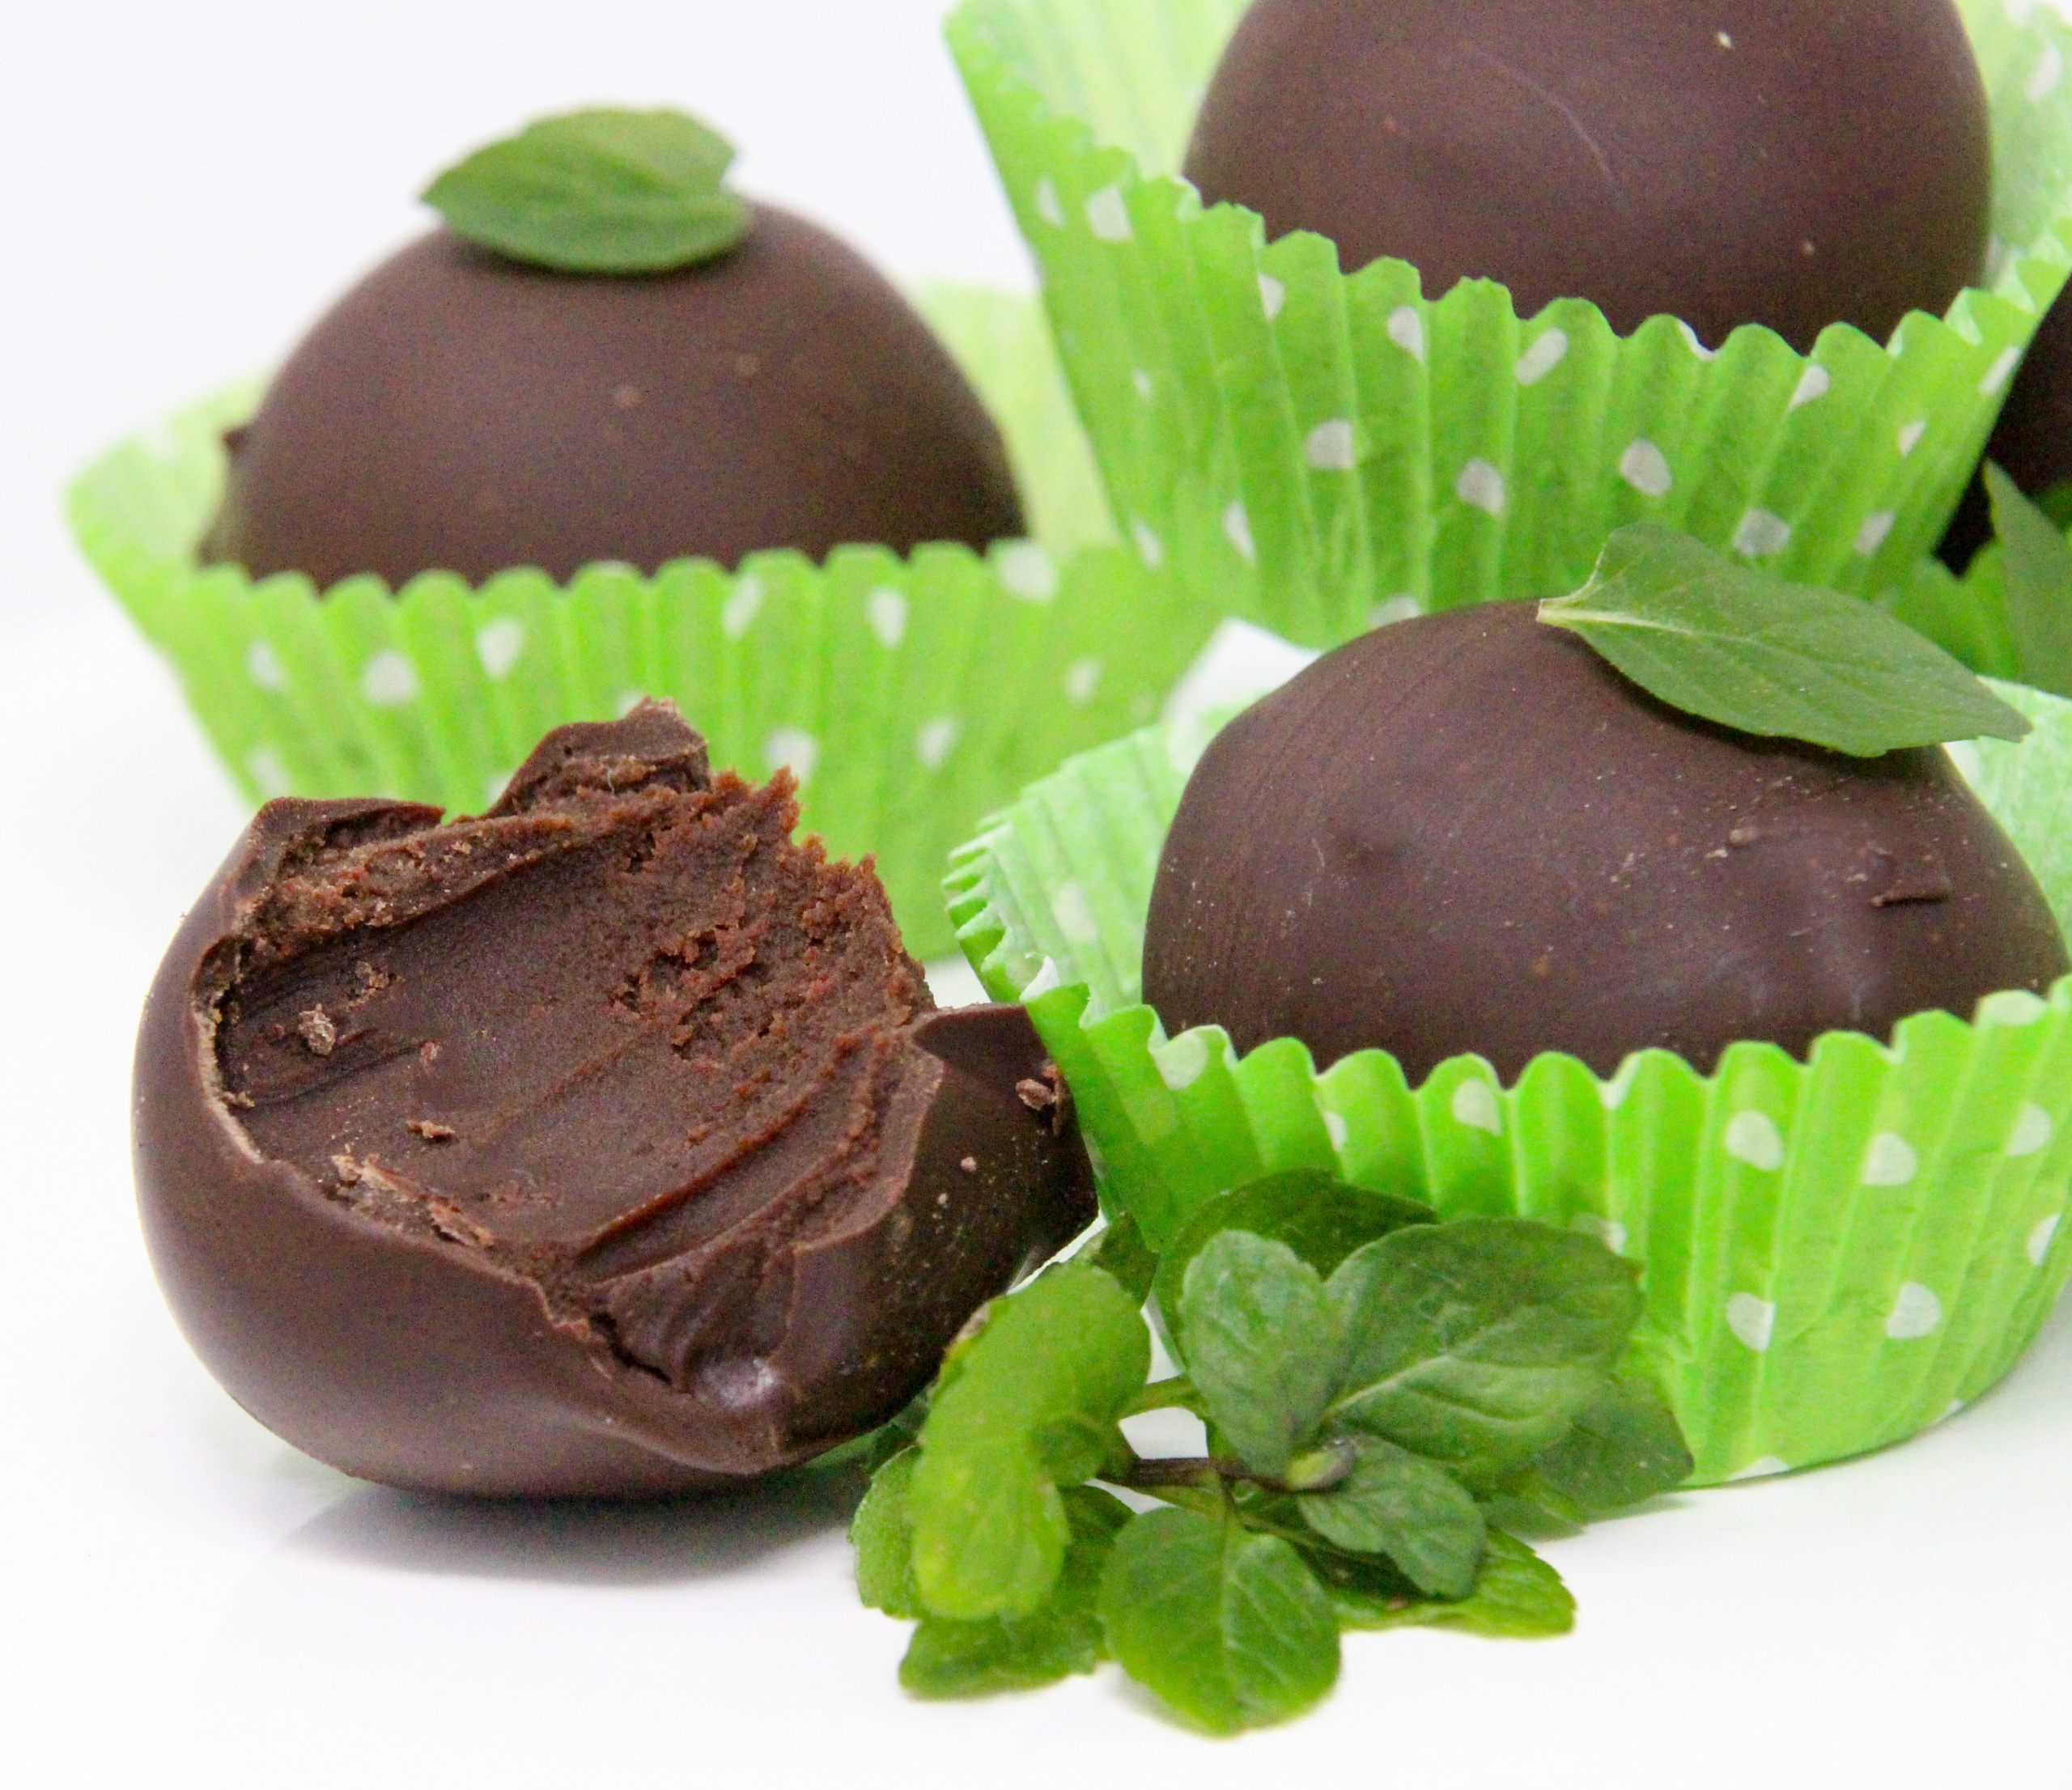 Mint Melty Truffles are delicately mint-flavored, melt-in-your-mouth, candies. With filling encased in a generous portion of dark chocolate, these treats make for a perfect gift or a special way to spoil yourself! Recipe shared with permission granted by Sarah Fox, author of Six Sweets Under. 